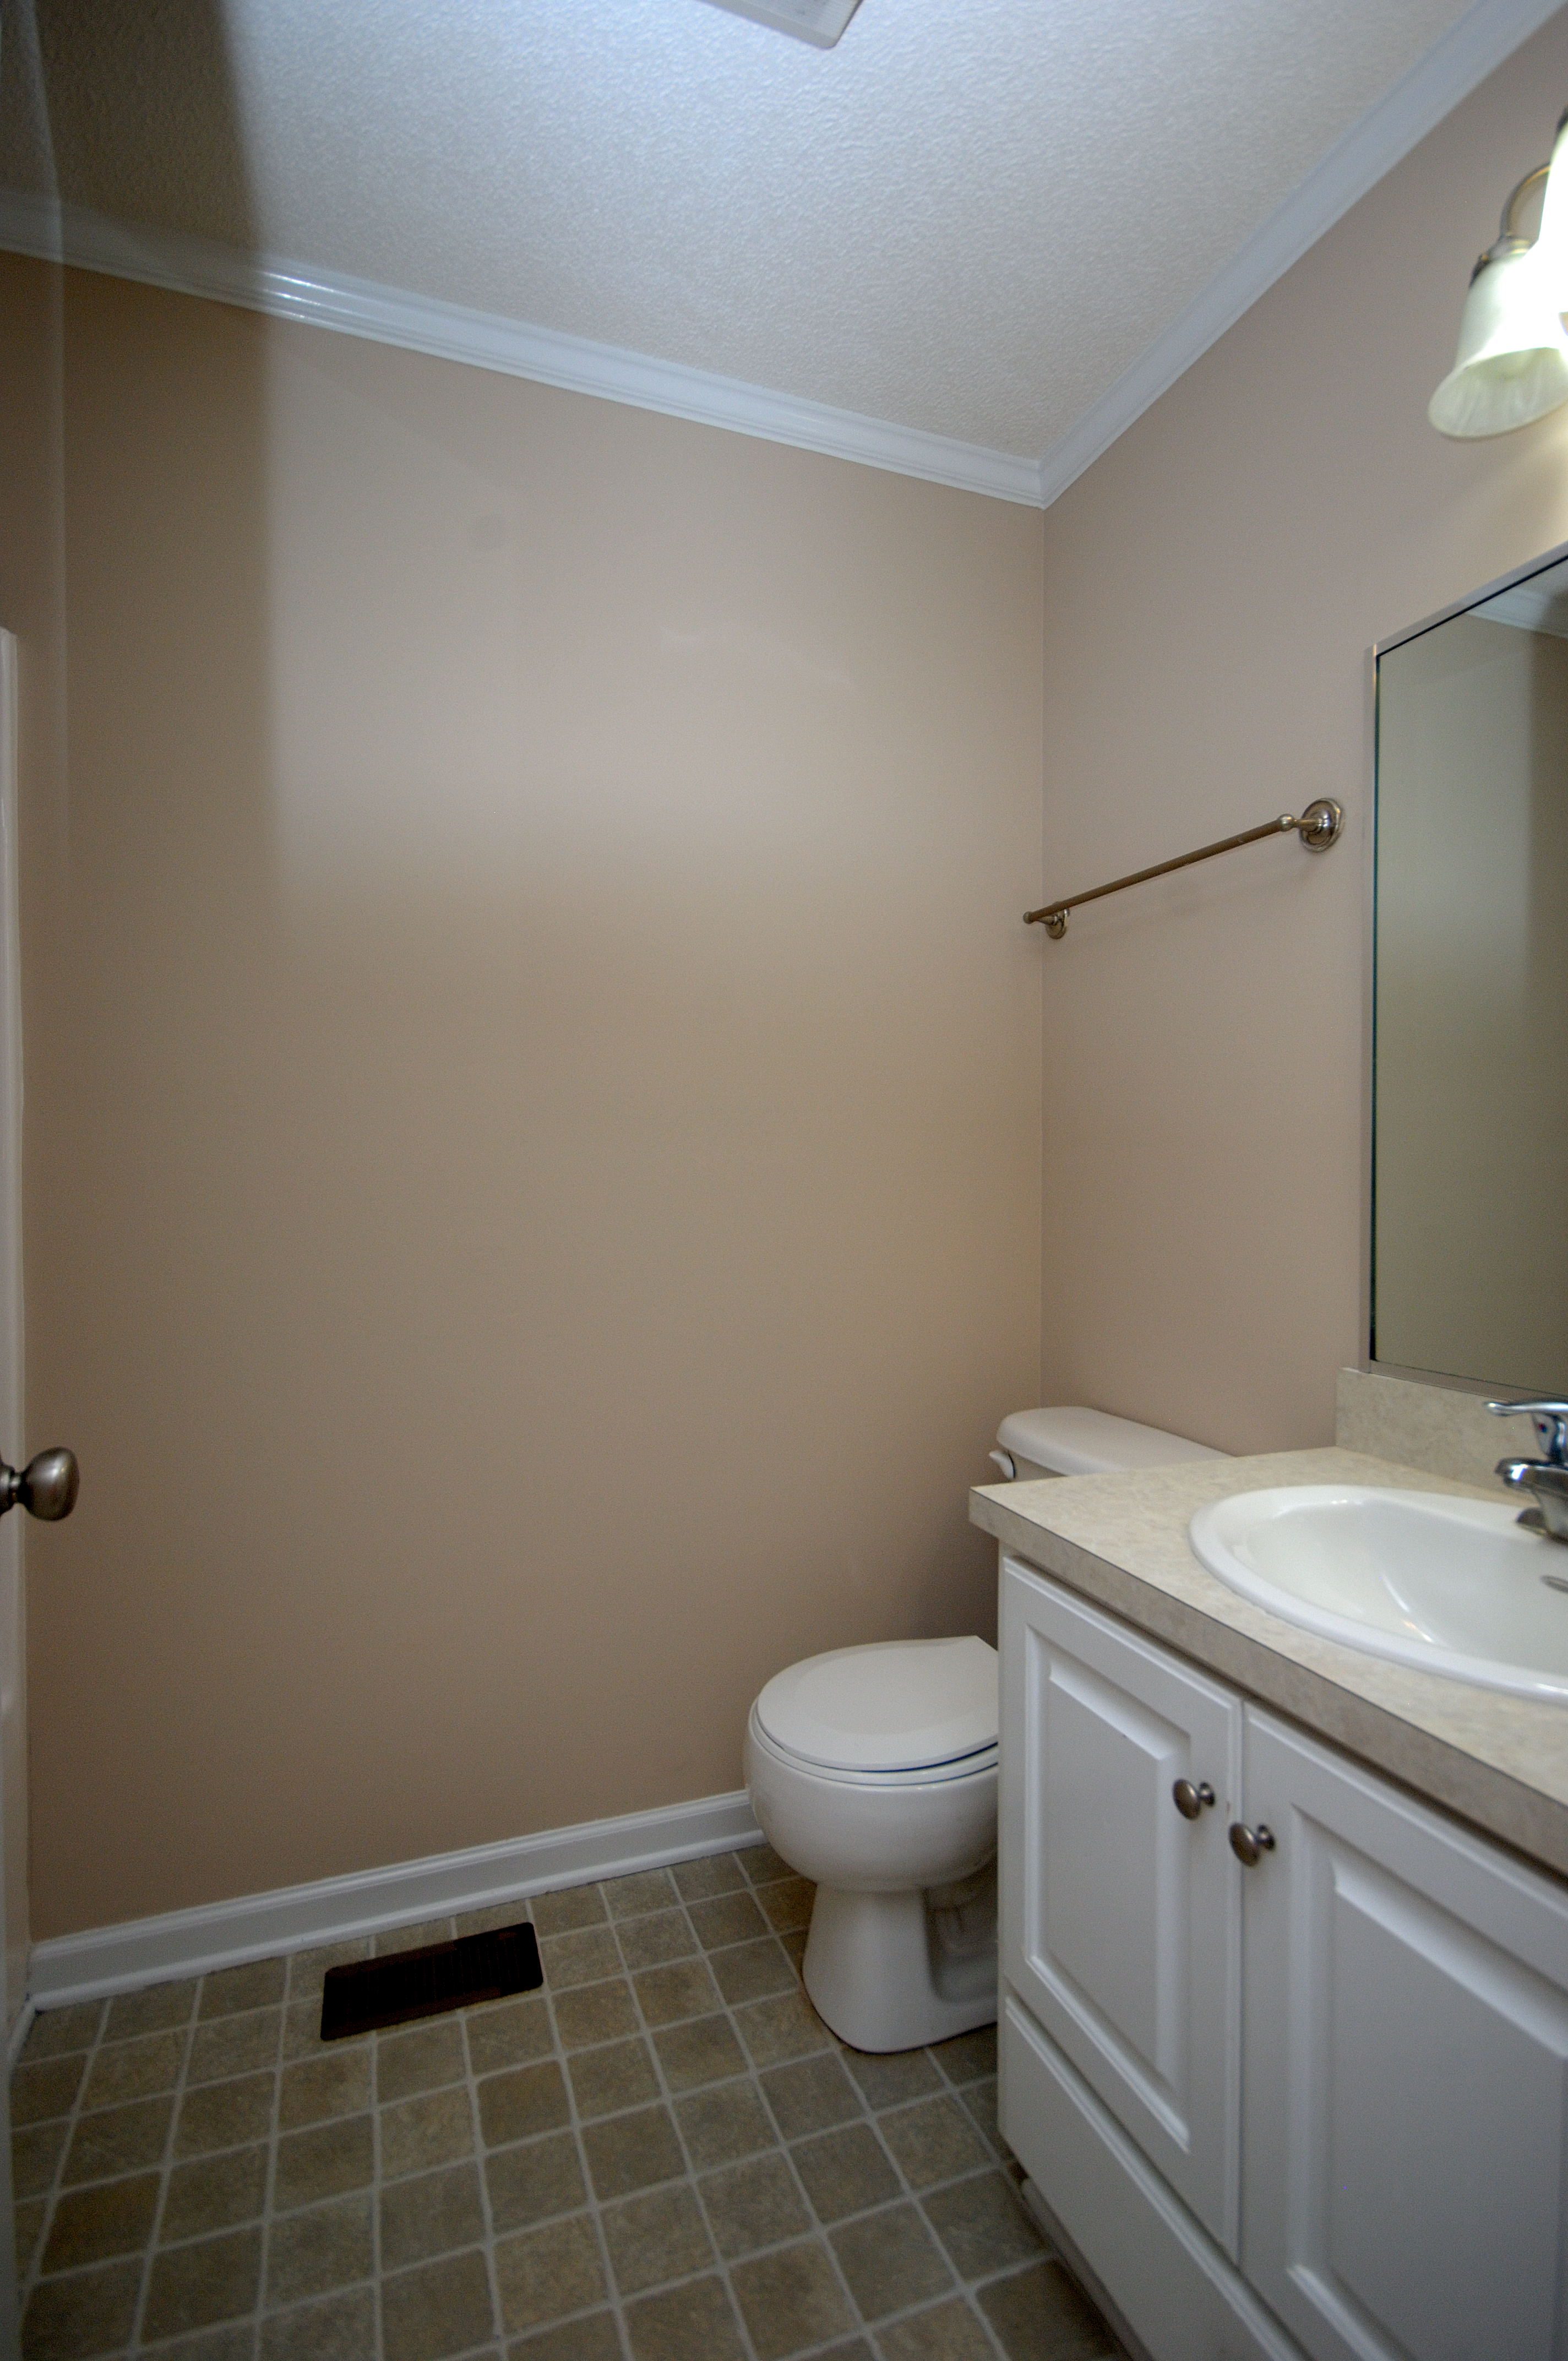 Goldsboro NC - Homes for Rent - 220 Koufax Drive Pikeville NC 27863 - Bathroom